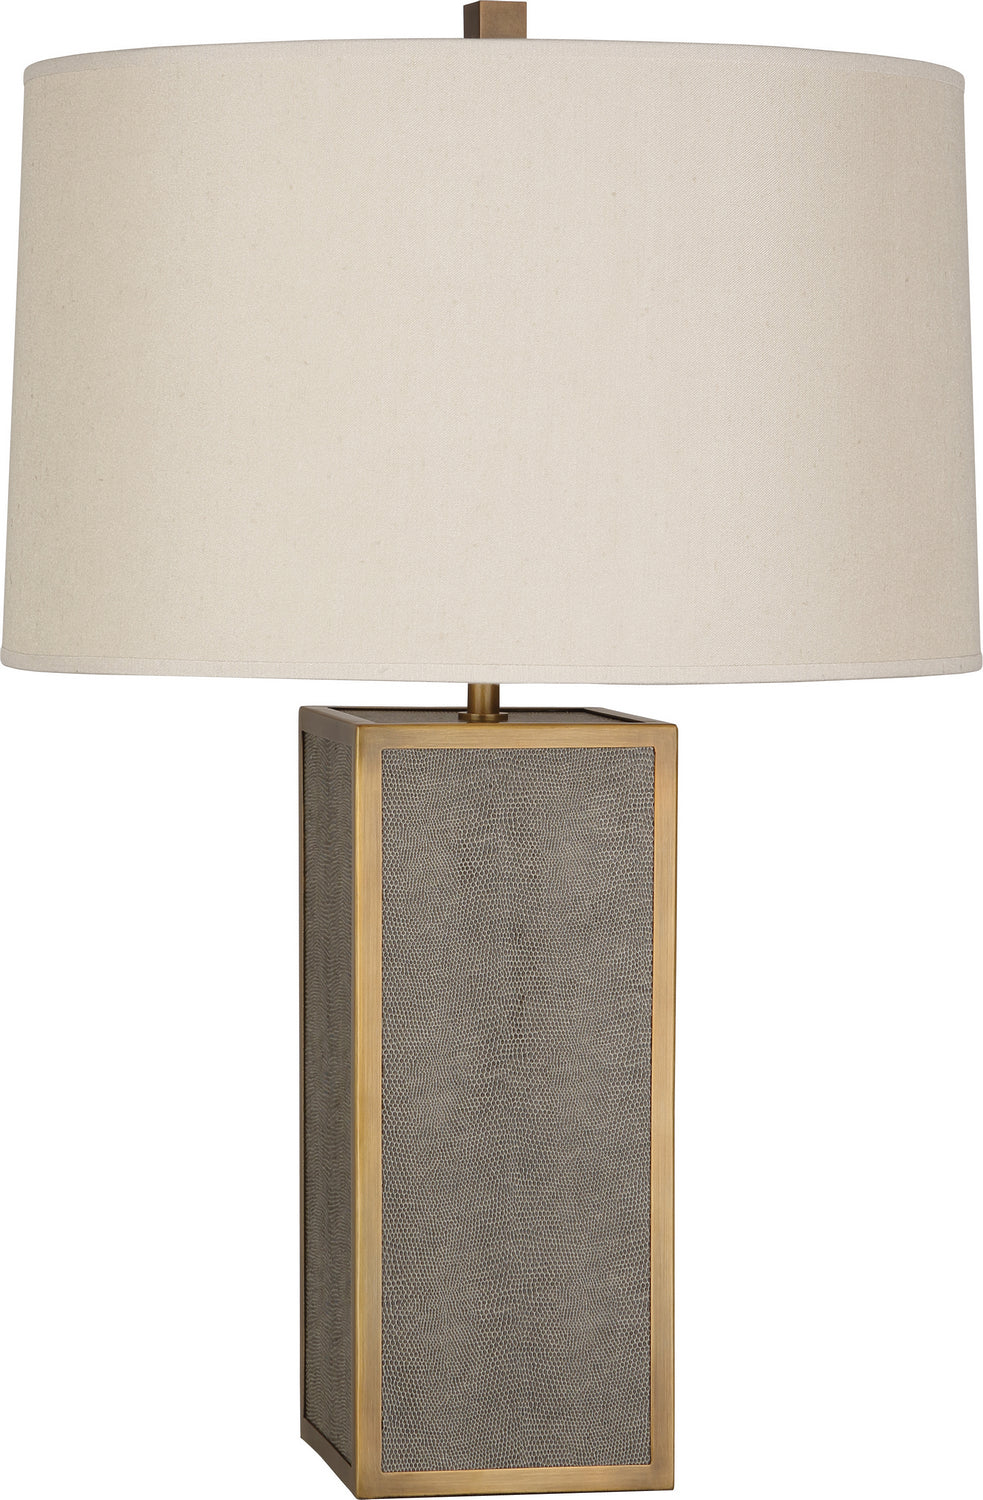 Robert Abbey - One Light Table Lamp - Anna - Faux Brown Snakeskin Wrapped Base w/Aged Brass- Union Lighting Luminaires Decor